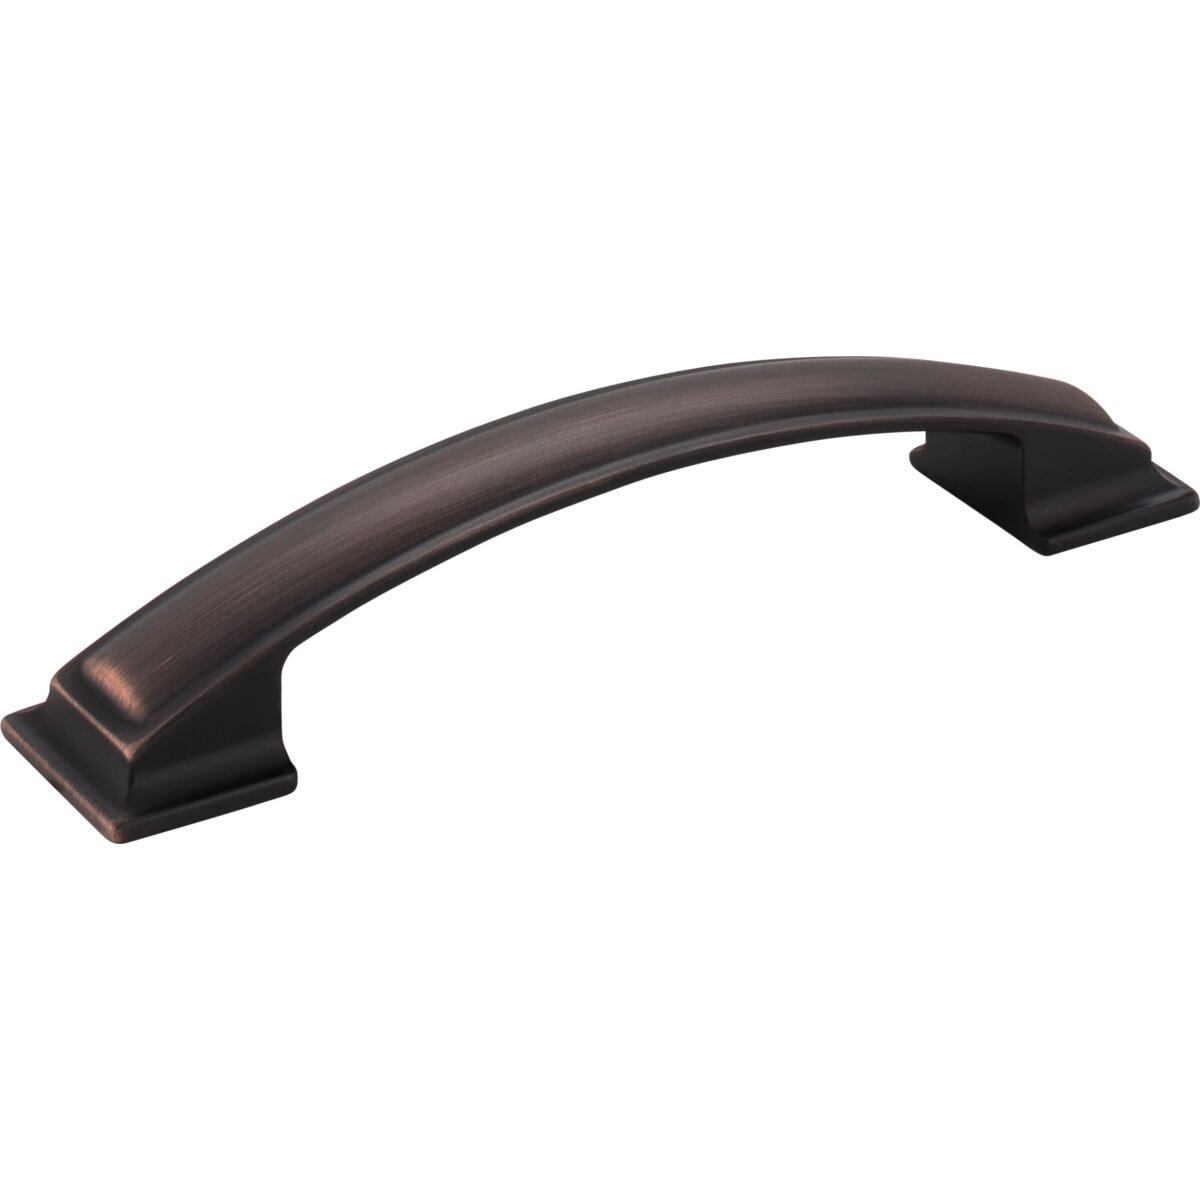 Annadale Brushed oil rubbed bronze